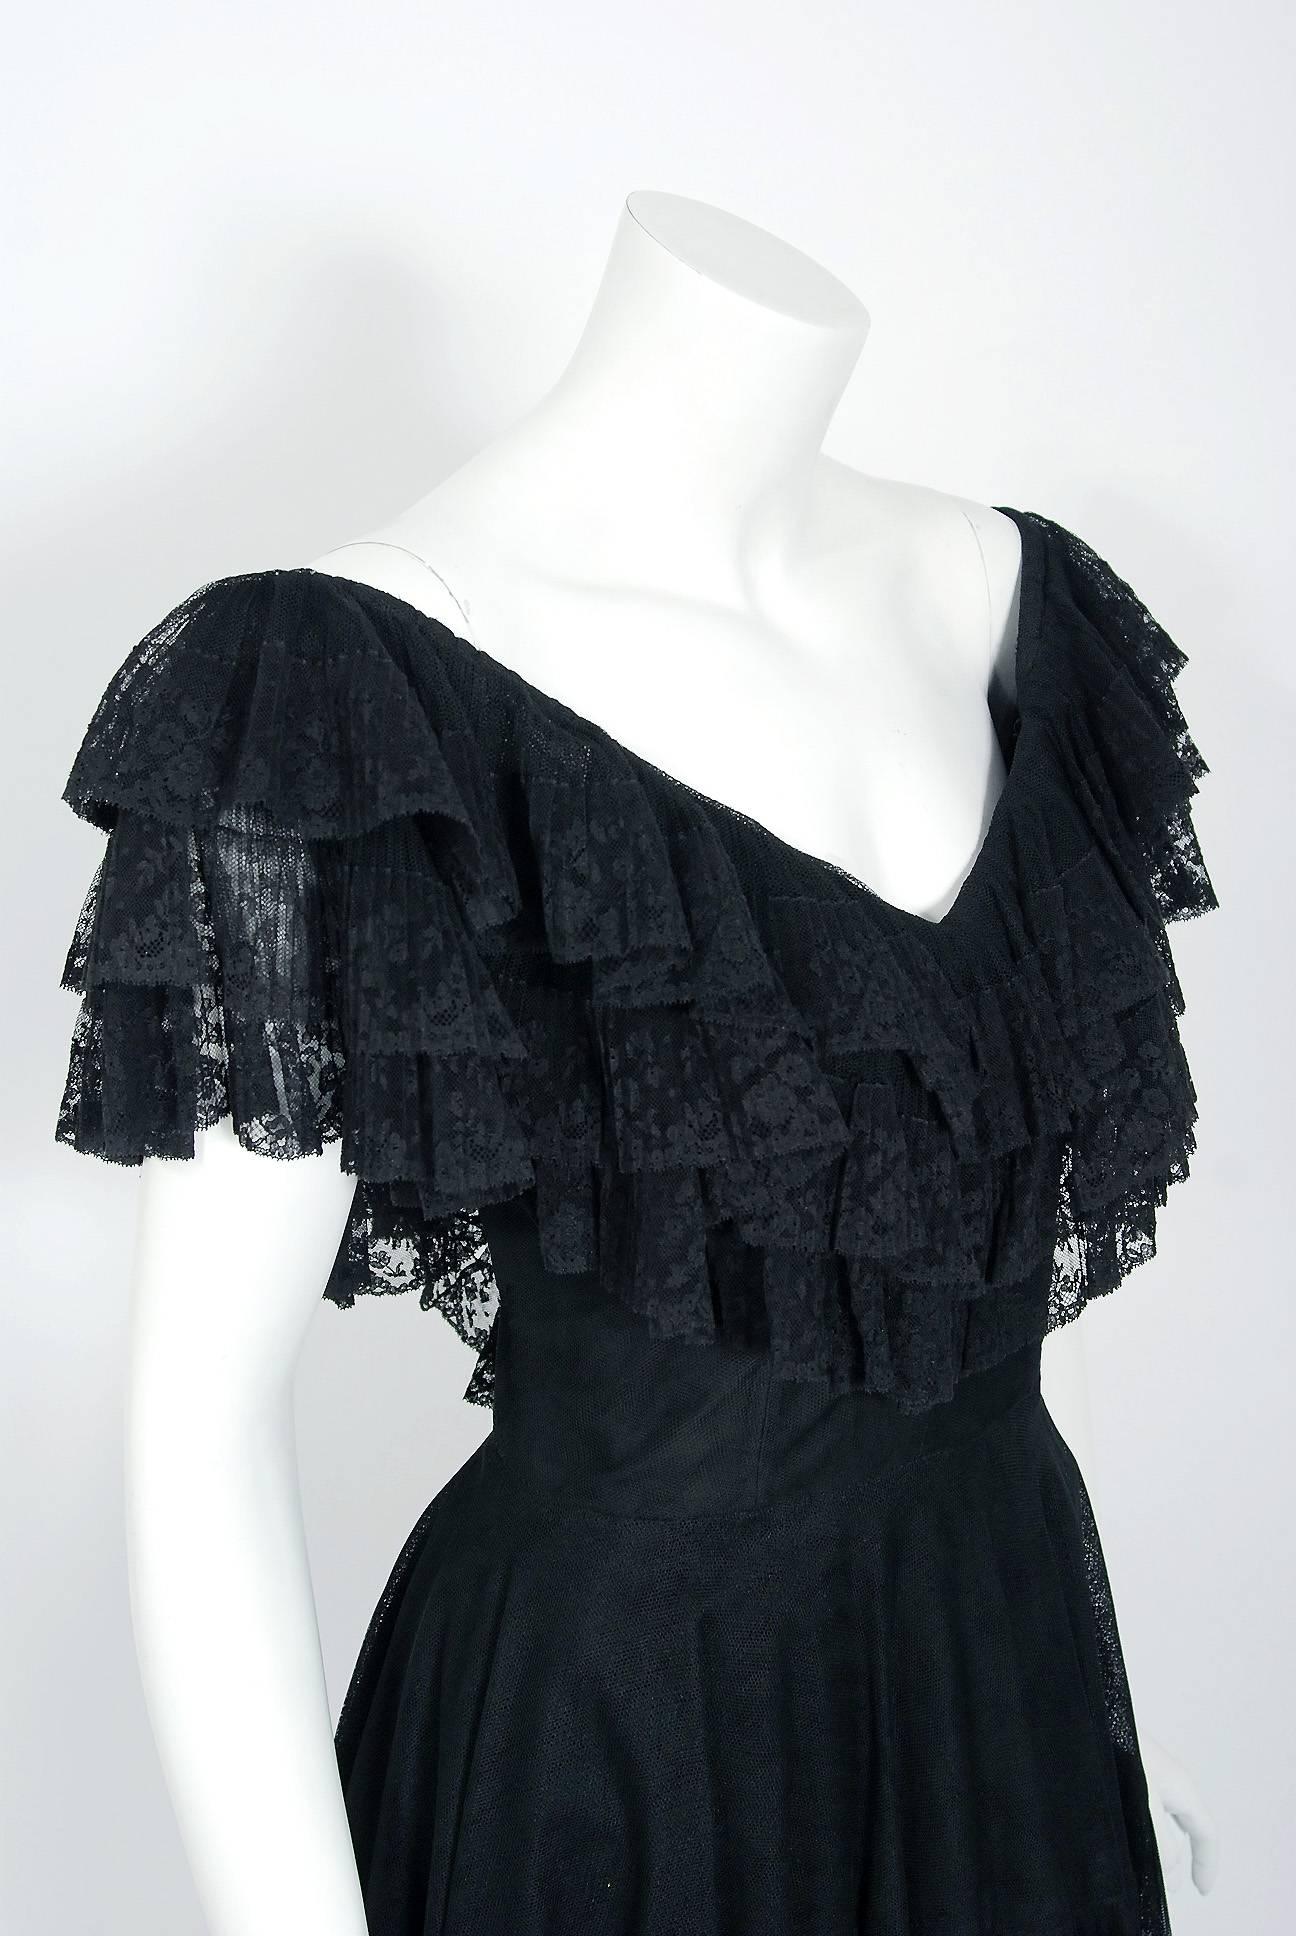 Breathtaking Jacques Fath Haute-Couture black lace dress dating back to the mid 1950's. Jacques Fath was a French fashion designer who was considered one of the three dominant influences on postwar couture, the others being Christian Dior and Pierre